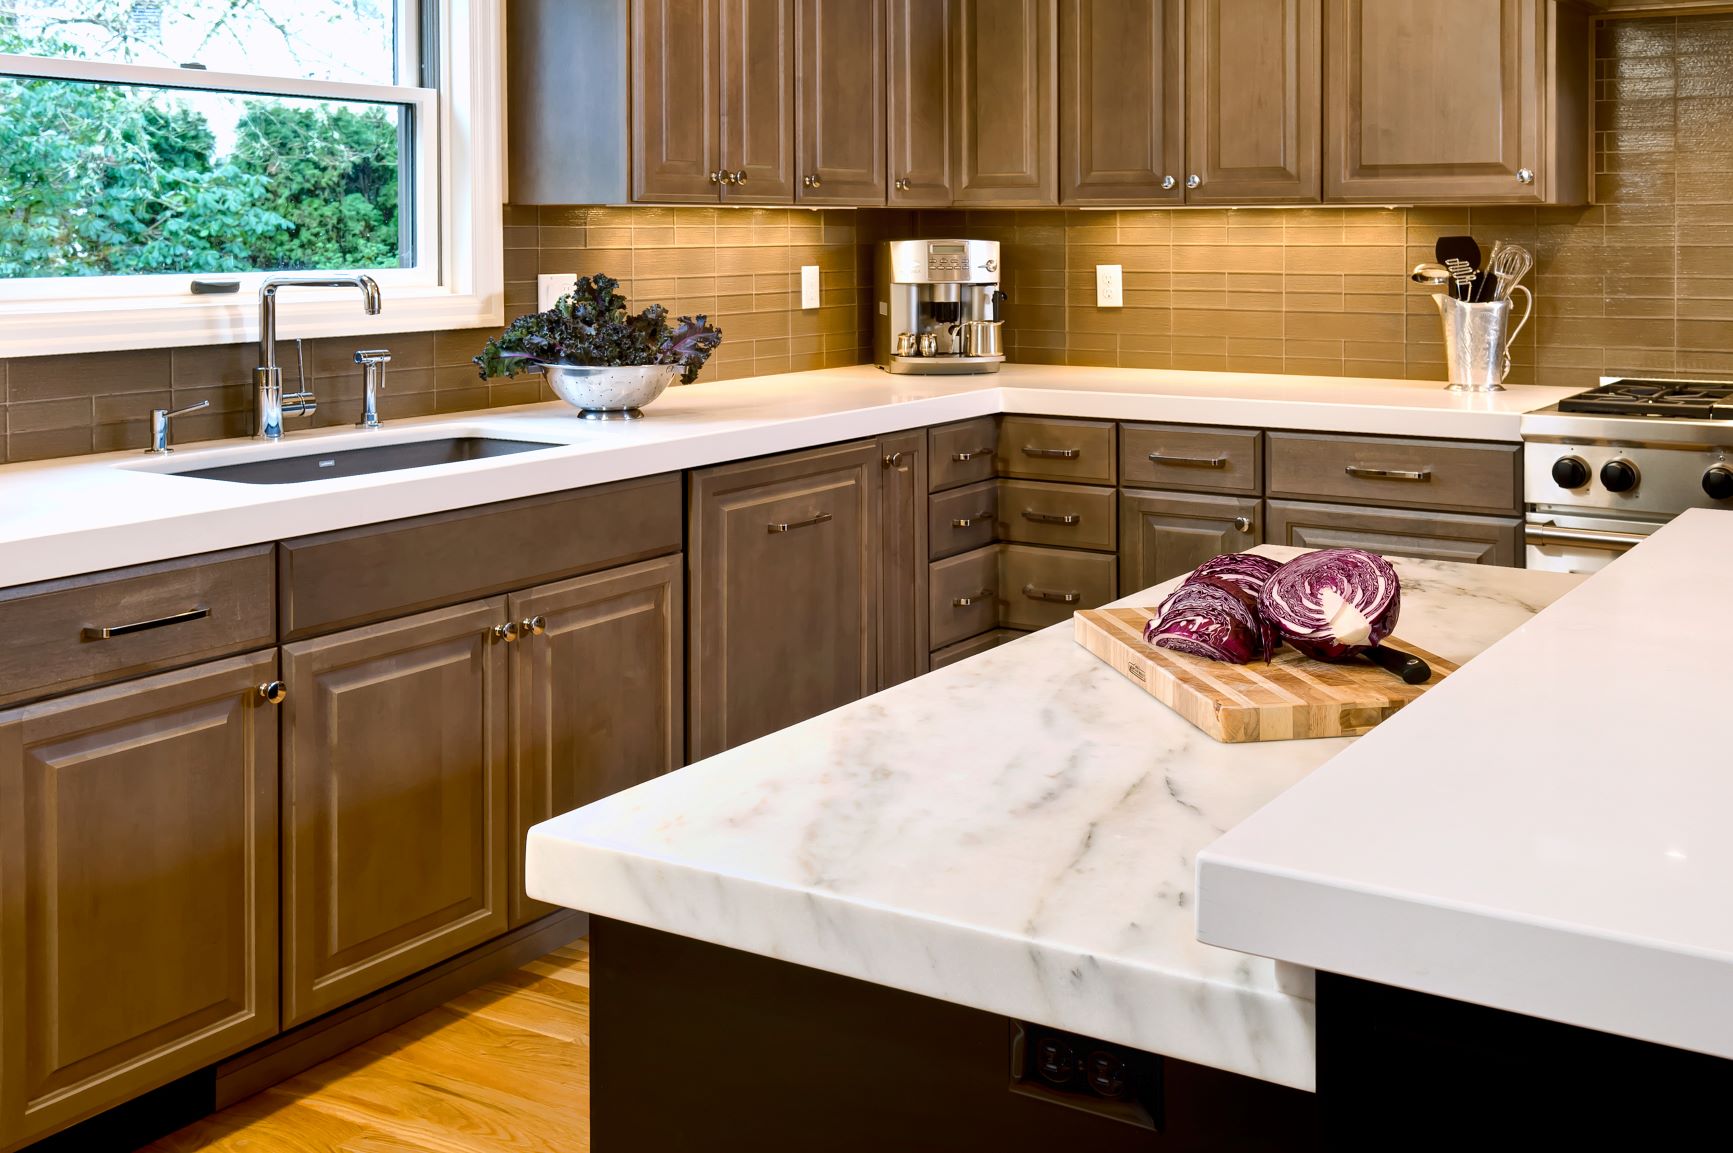 Distinct work stations for multiple cooks include this marble counter for pastry.